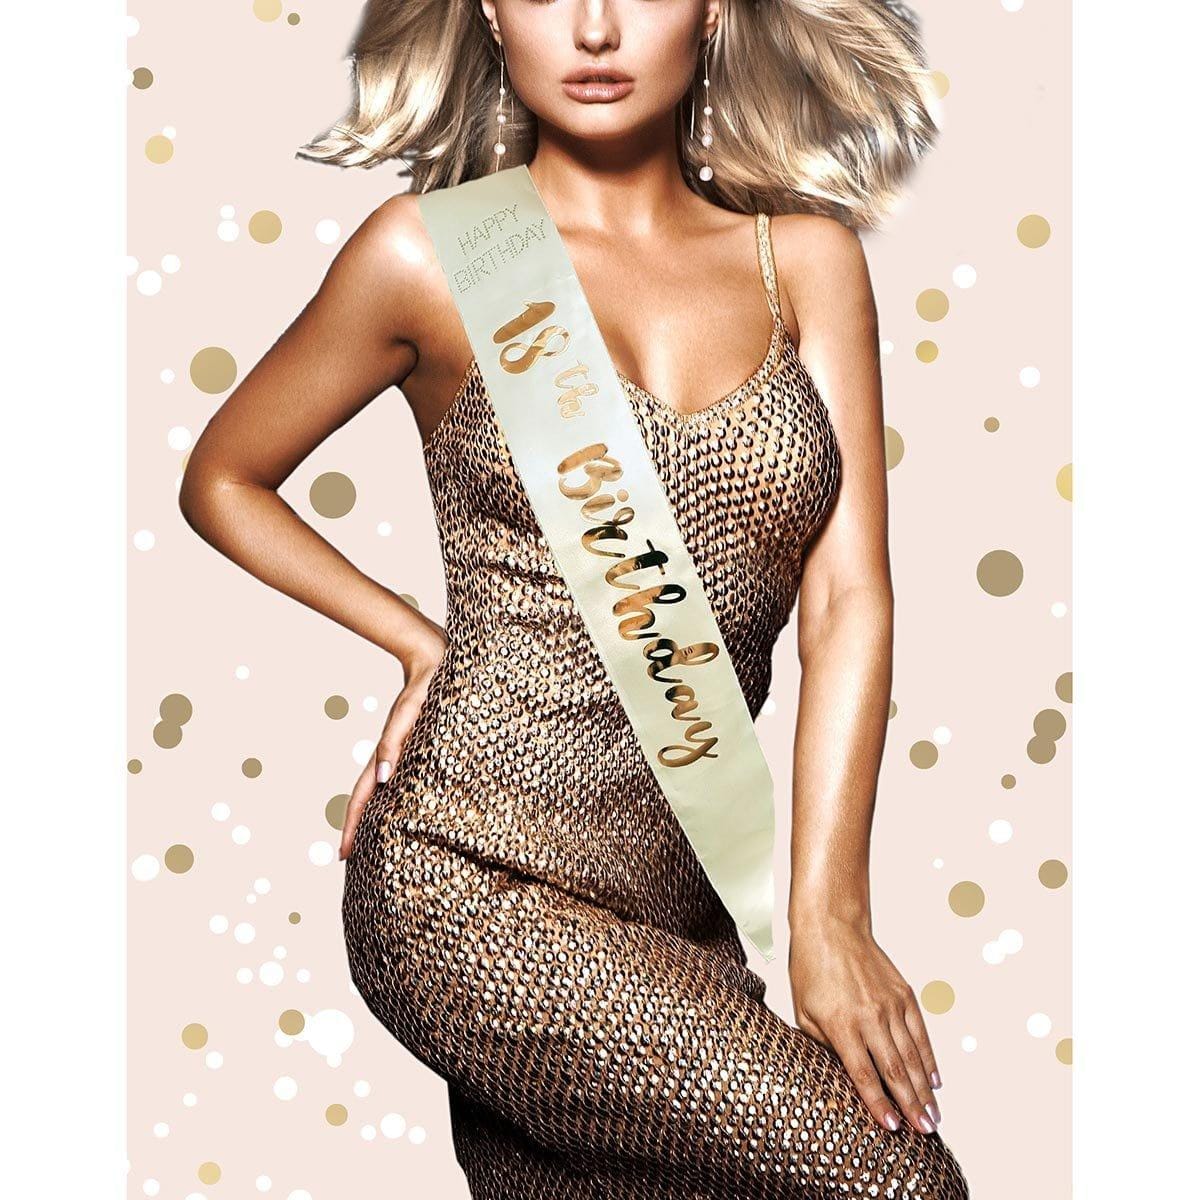 Buy Age Specific Birthday Rose Gold Birthday Sash - 18th sold at Party Expert